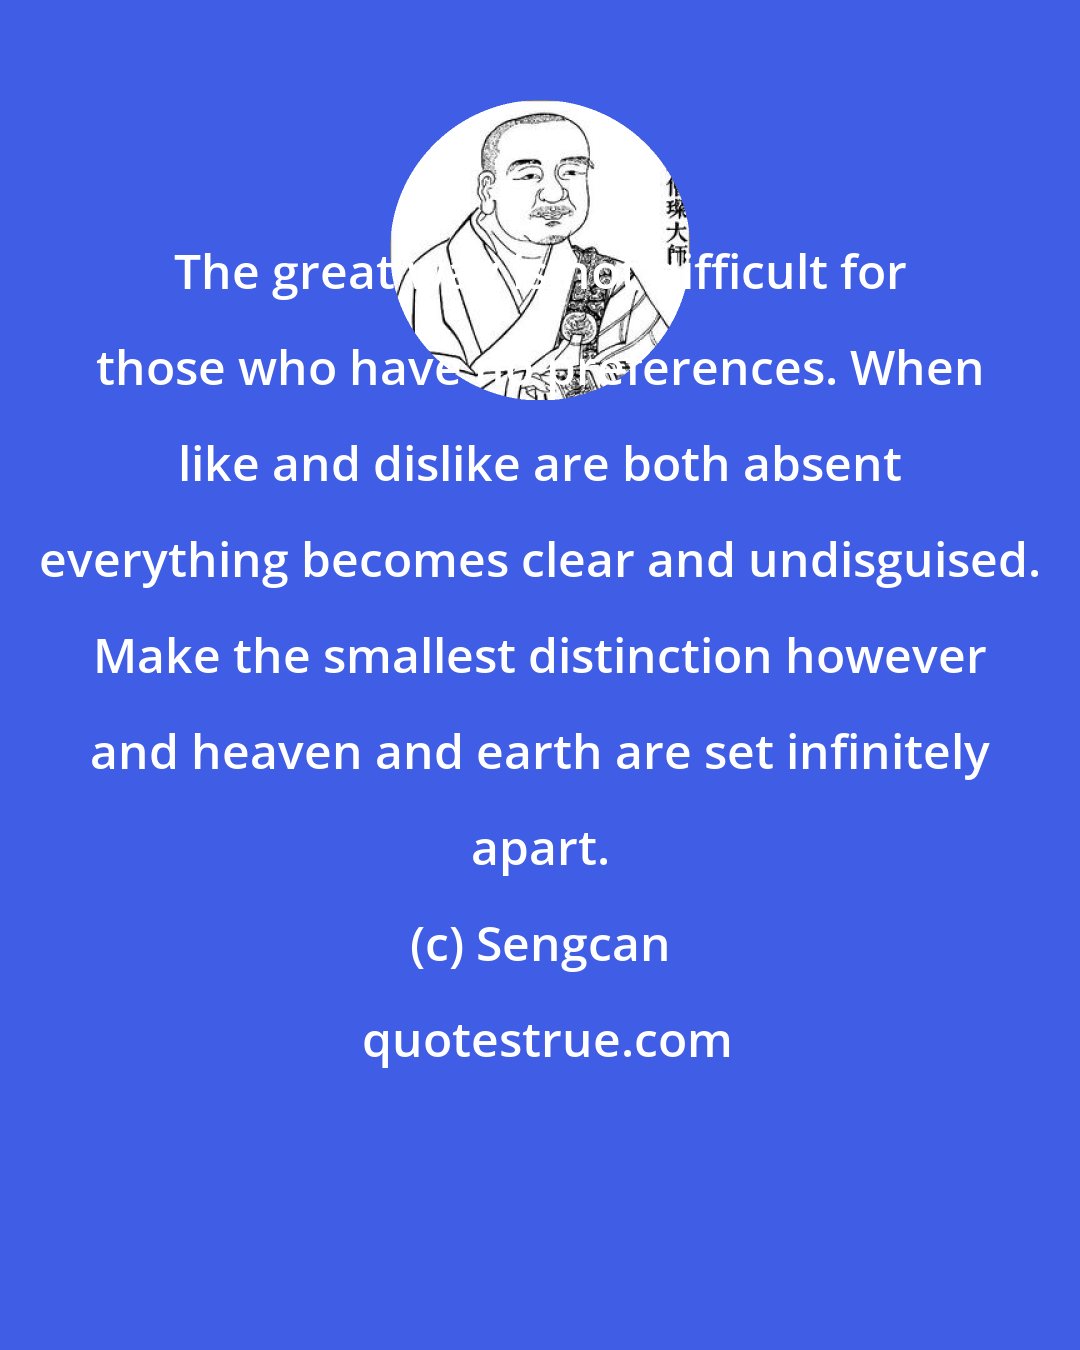 Sengcan: The great way is not difficult for those who have no preferences. When like and dislike are both absent everything becomes clear and undisguised. Make the smallest distinction however and heaven and earth are set infinitely apart.